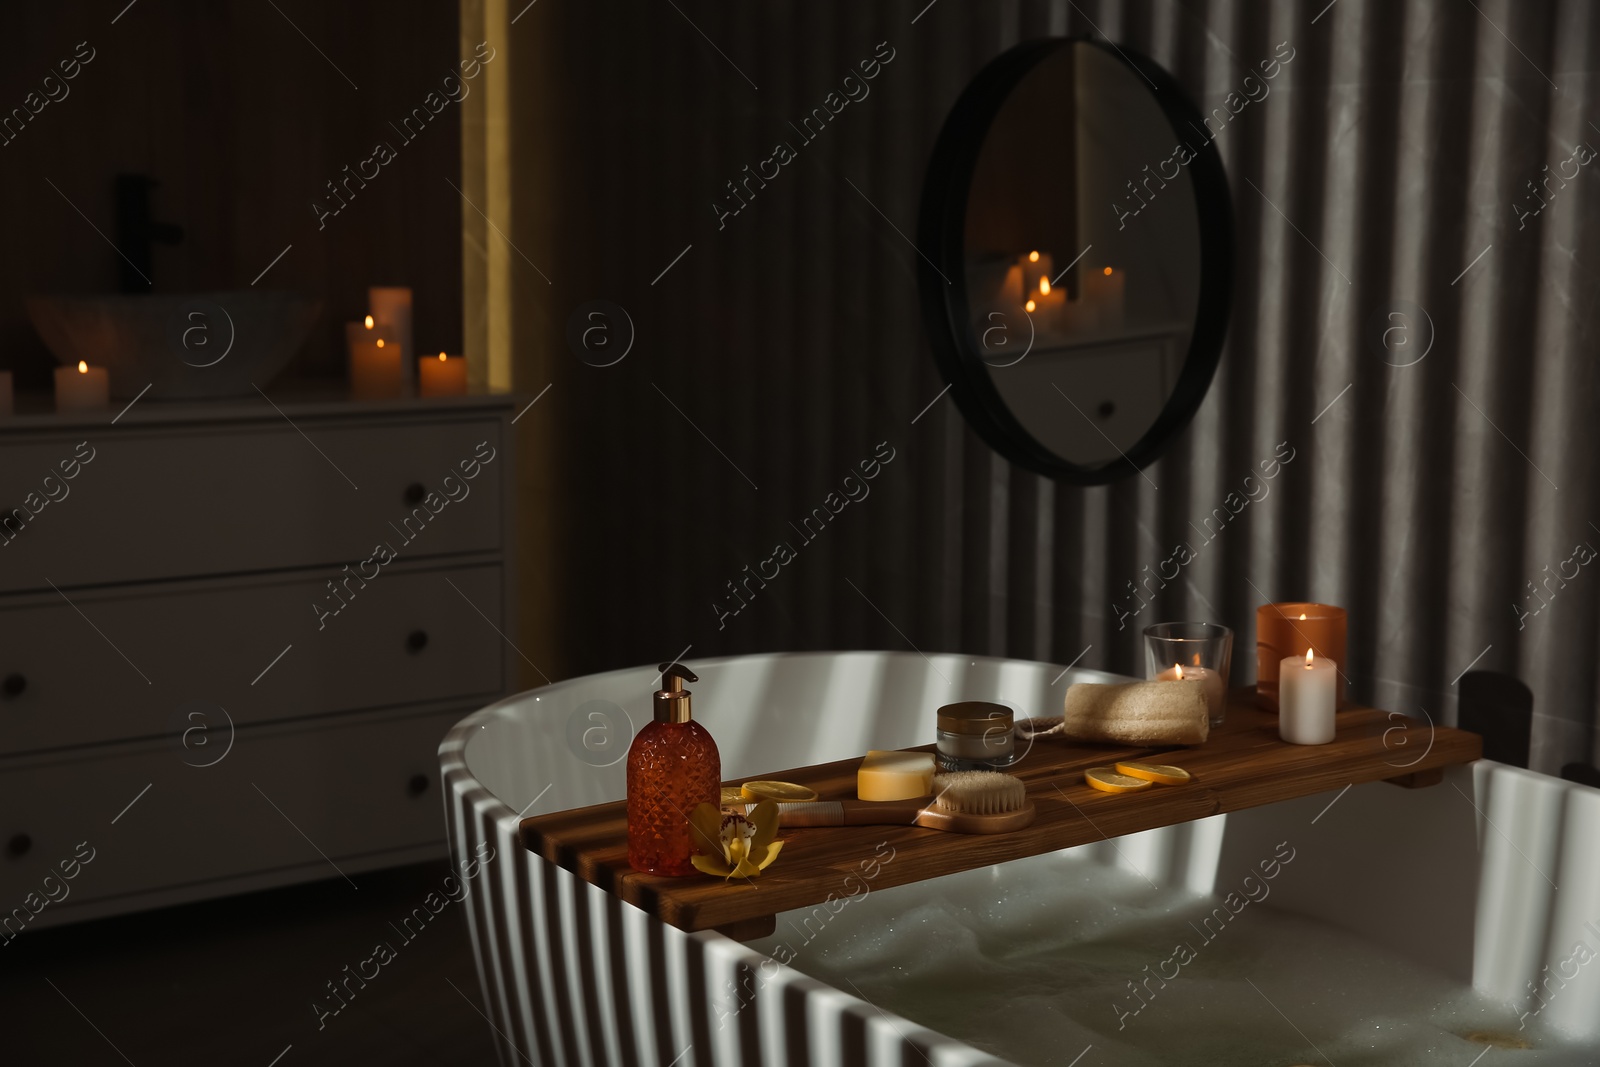 Photo of Wooden bath tray with candles and bathroom amenities on tub indoors